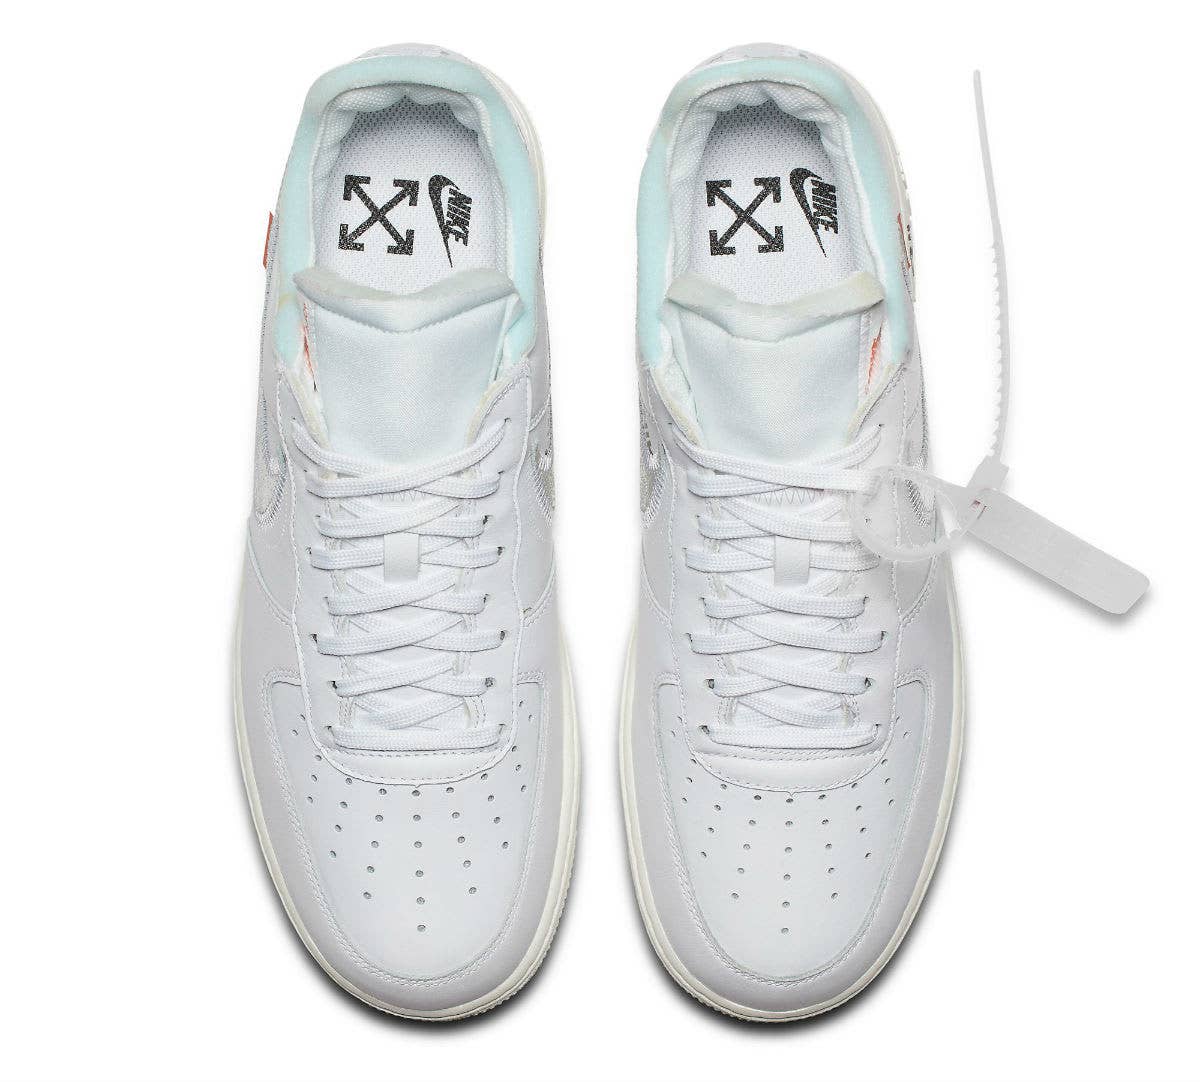 The 'ComplexCon' x Nike Air Force 1 Low May Be Releasing |